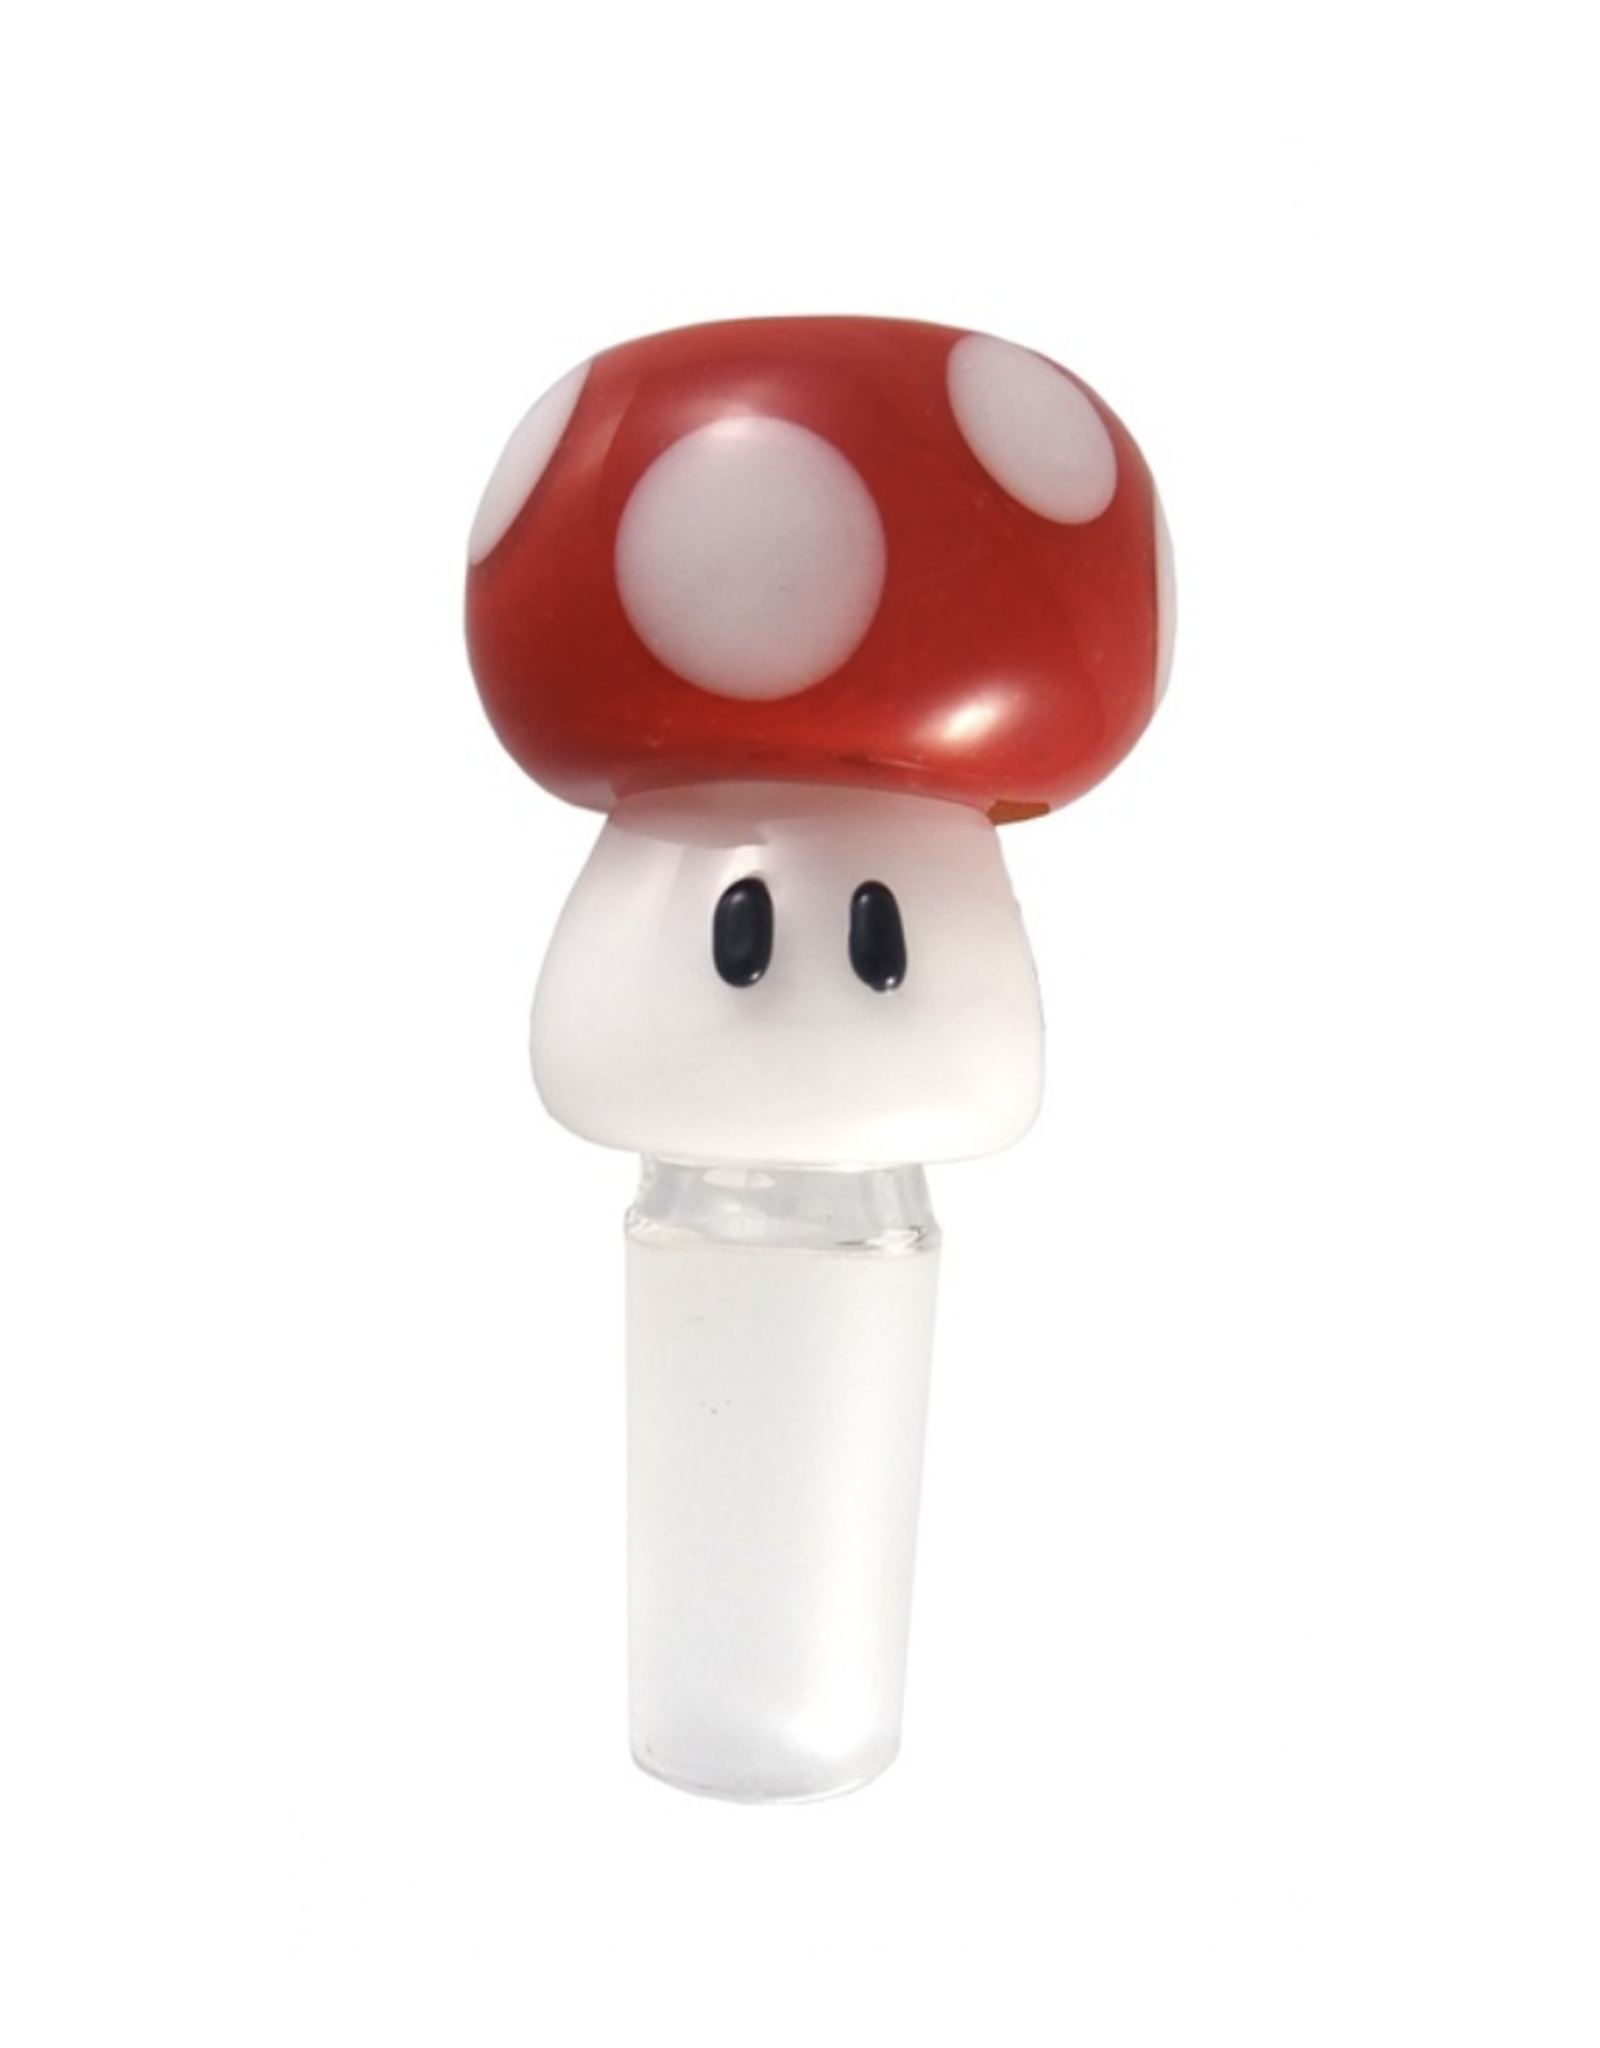 14mm Male Red Mushroom Bowl by Empire Glass